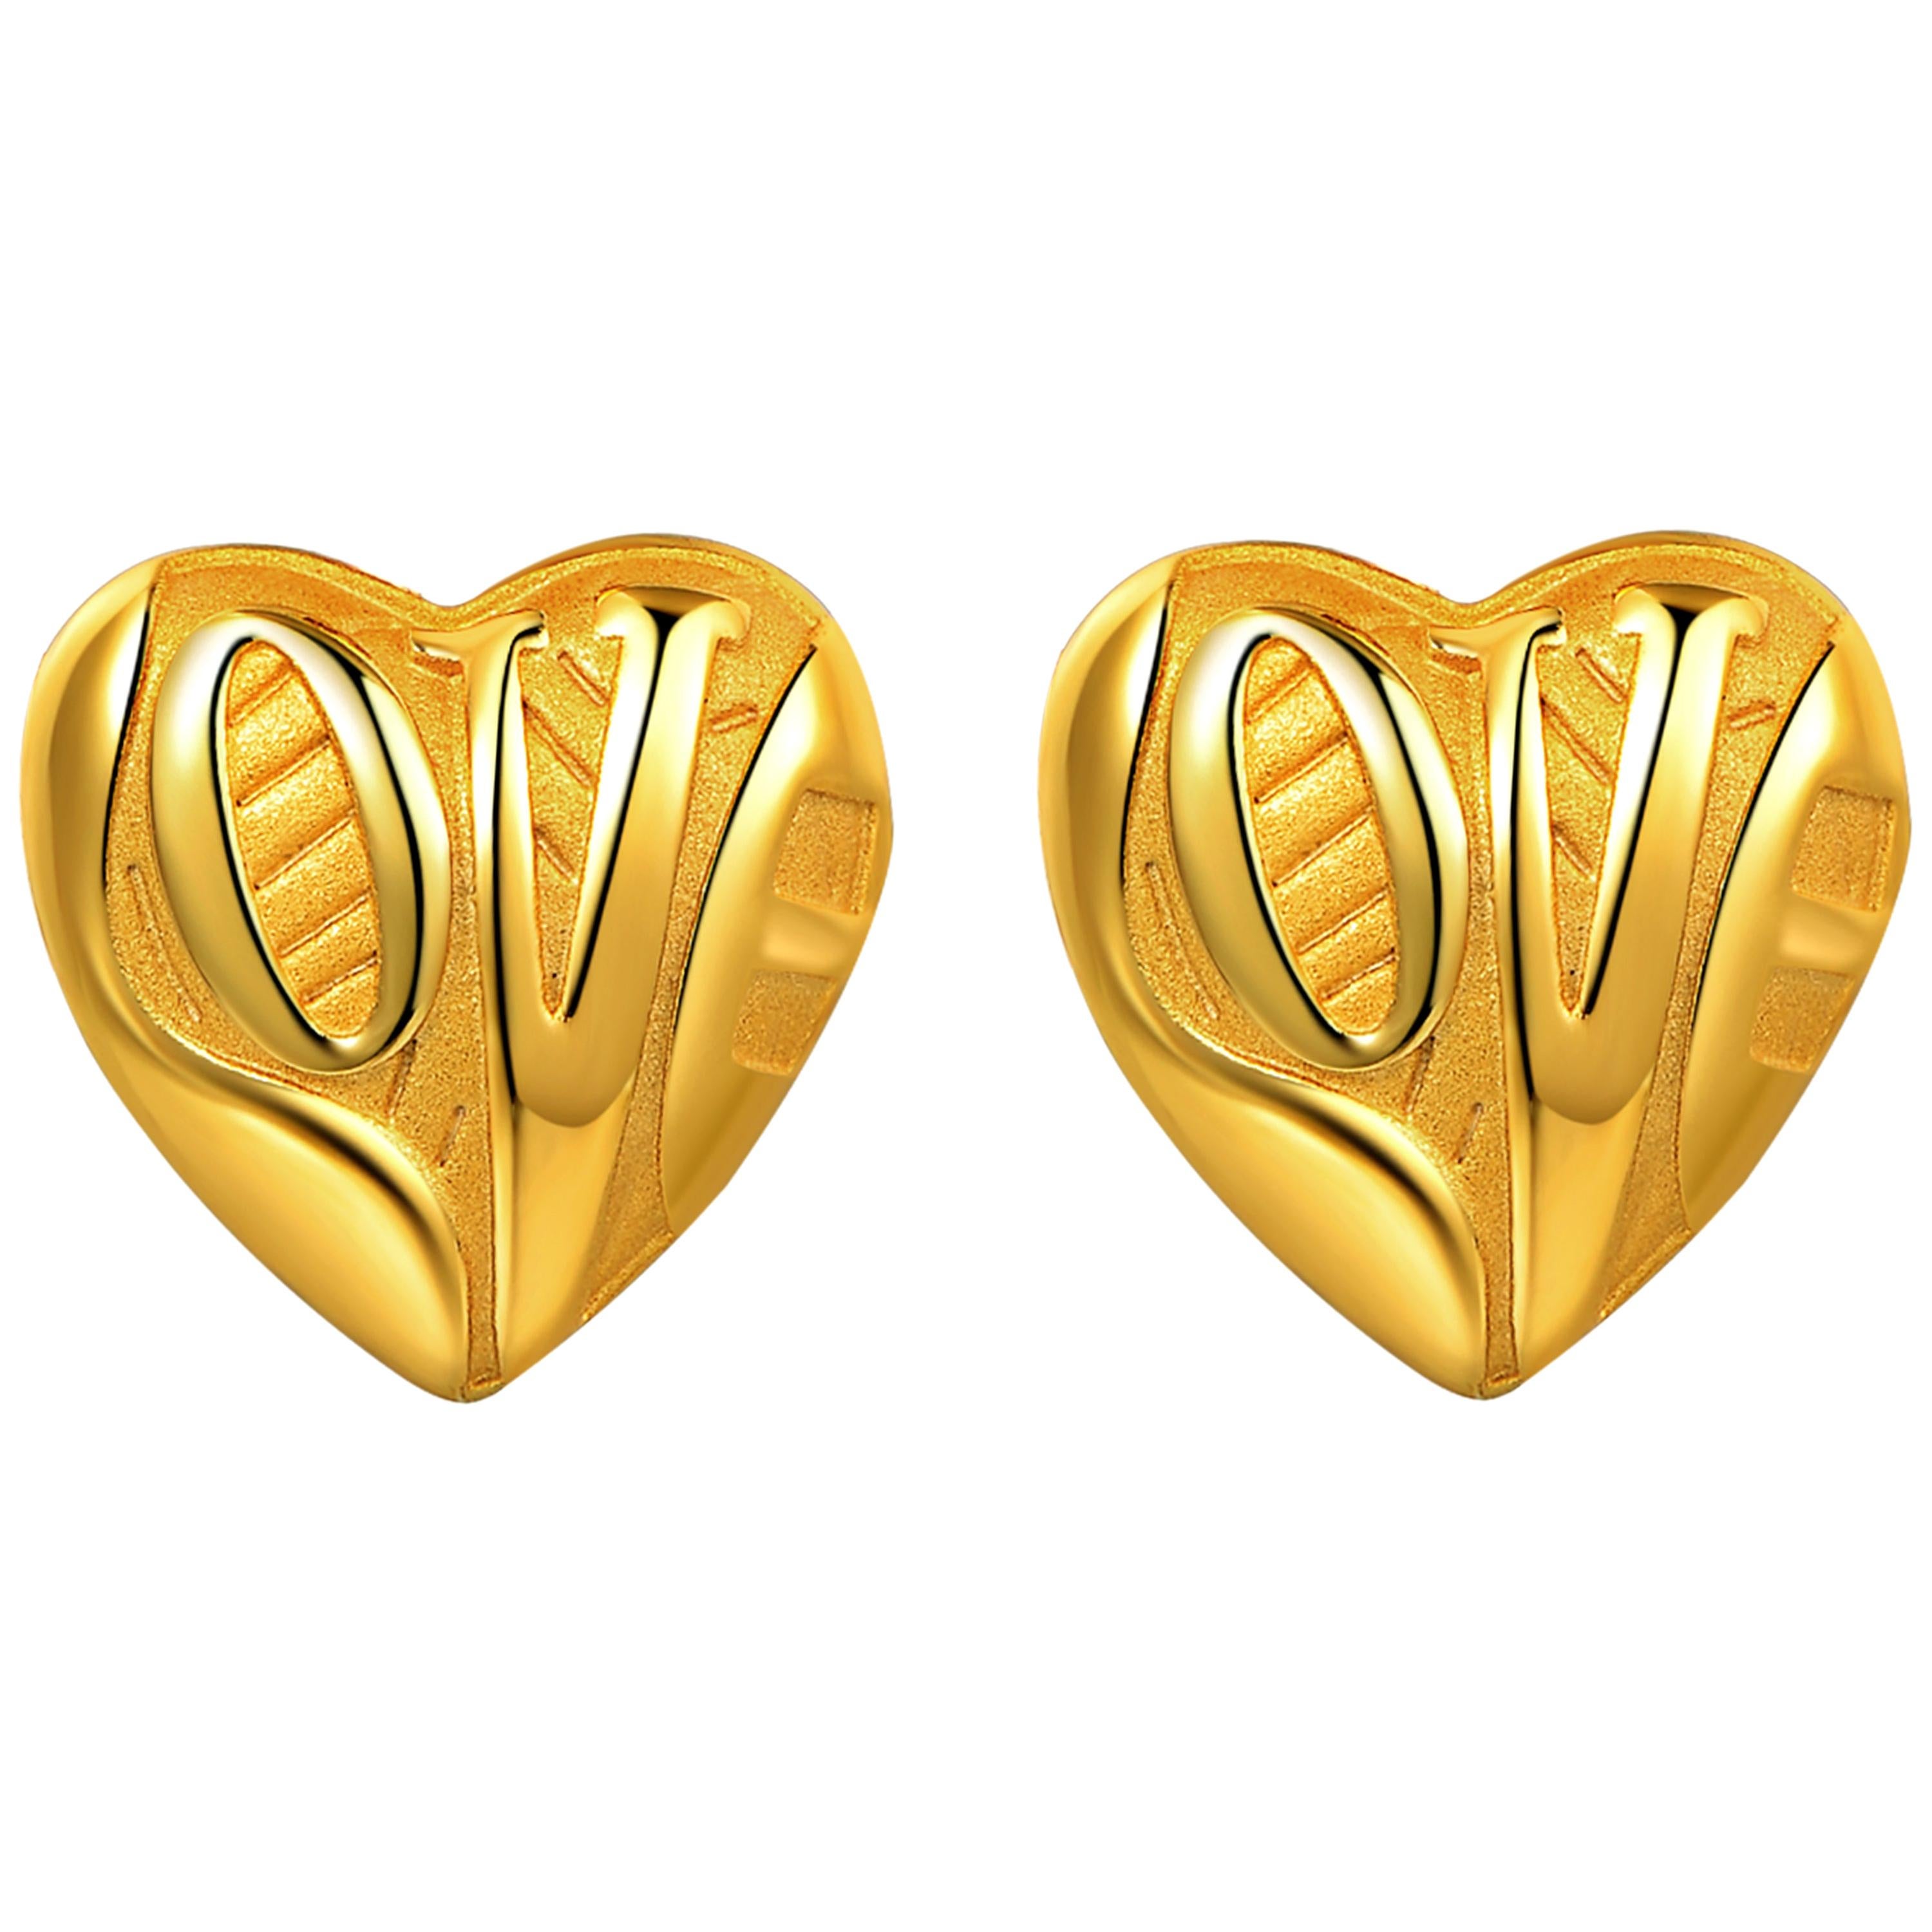 Fei Liu Yellow Gold Plated Sterling Silver 'Love' Inscribed Heart Stud Earrings